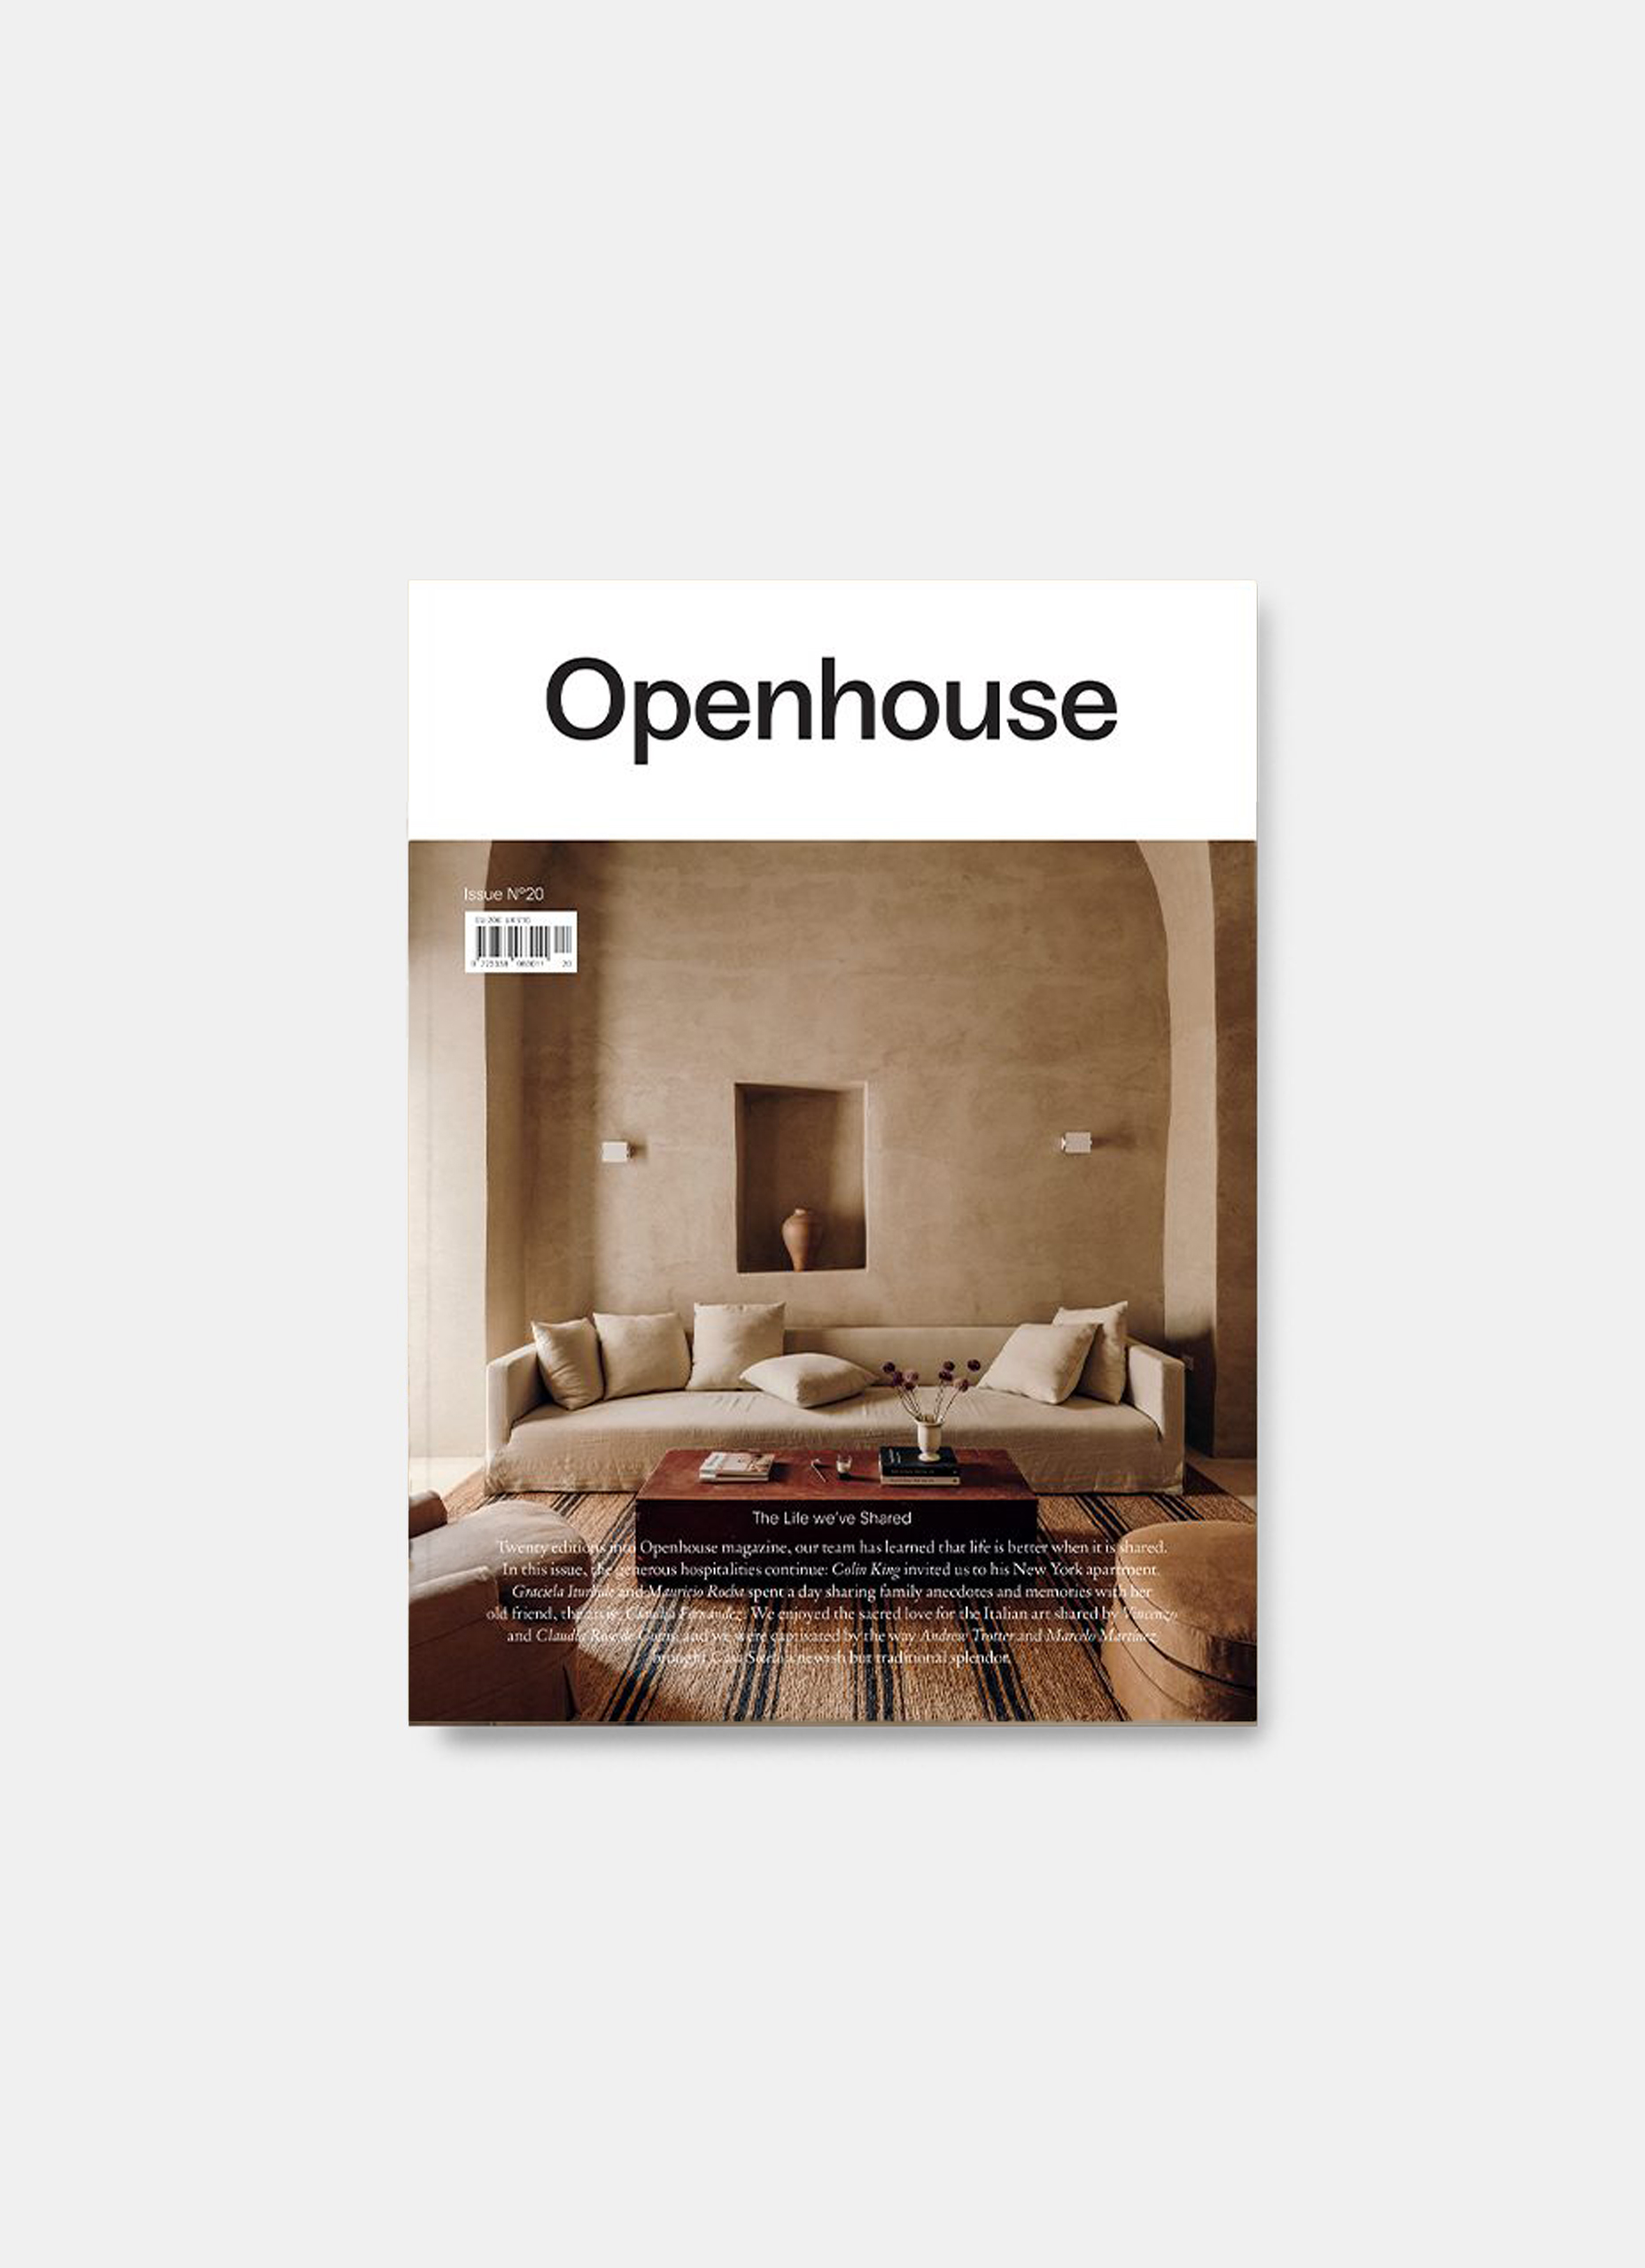 Openhouse Magazine - Issue 20 - The Life we have shared